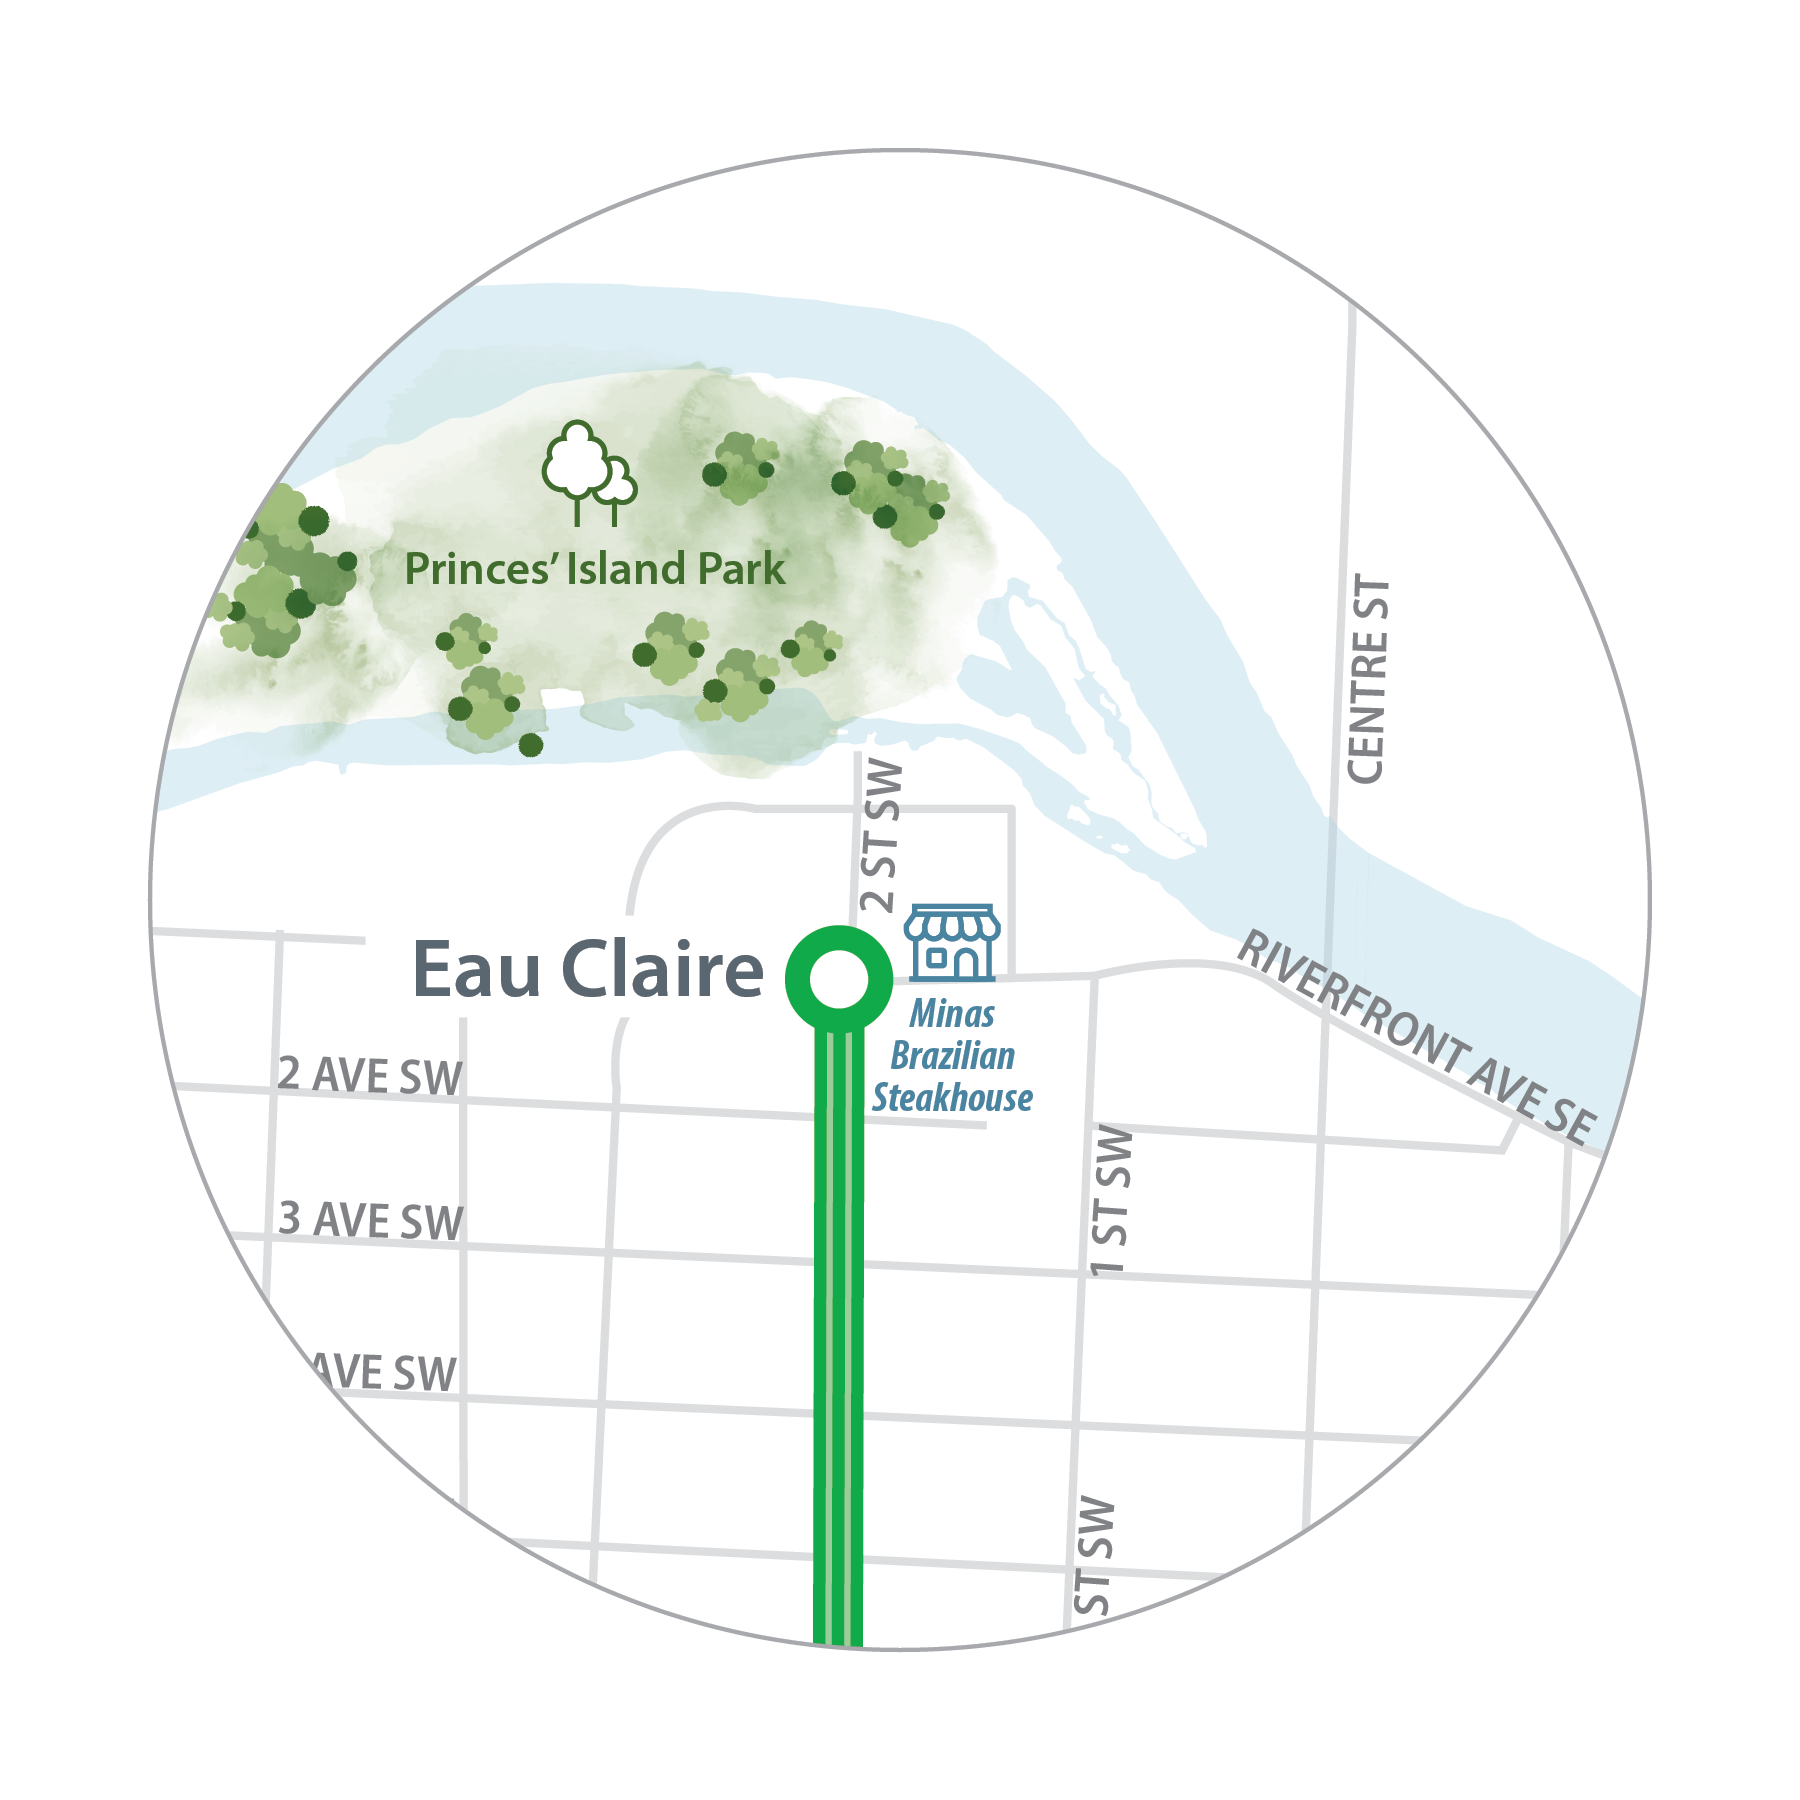 Map of Minas Brazilian Steakhouse in relation to Eau Claire Station.